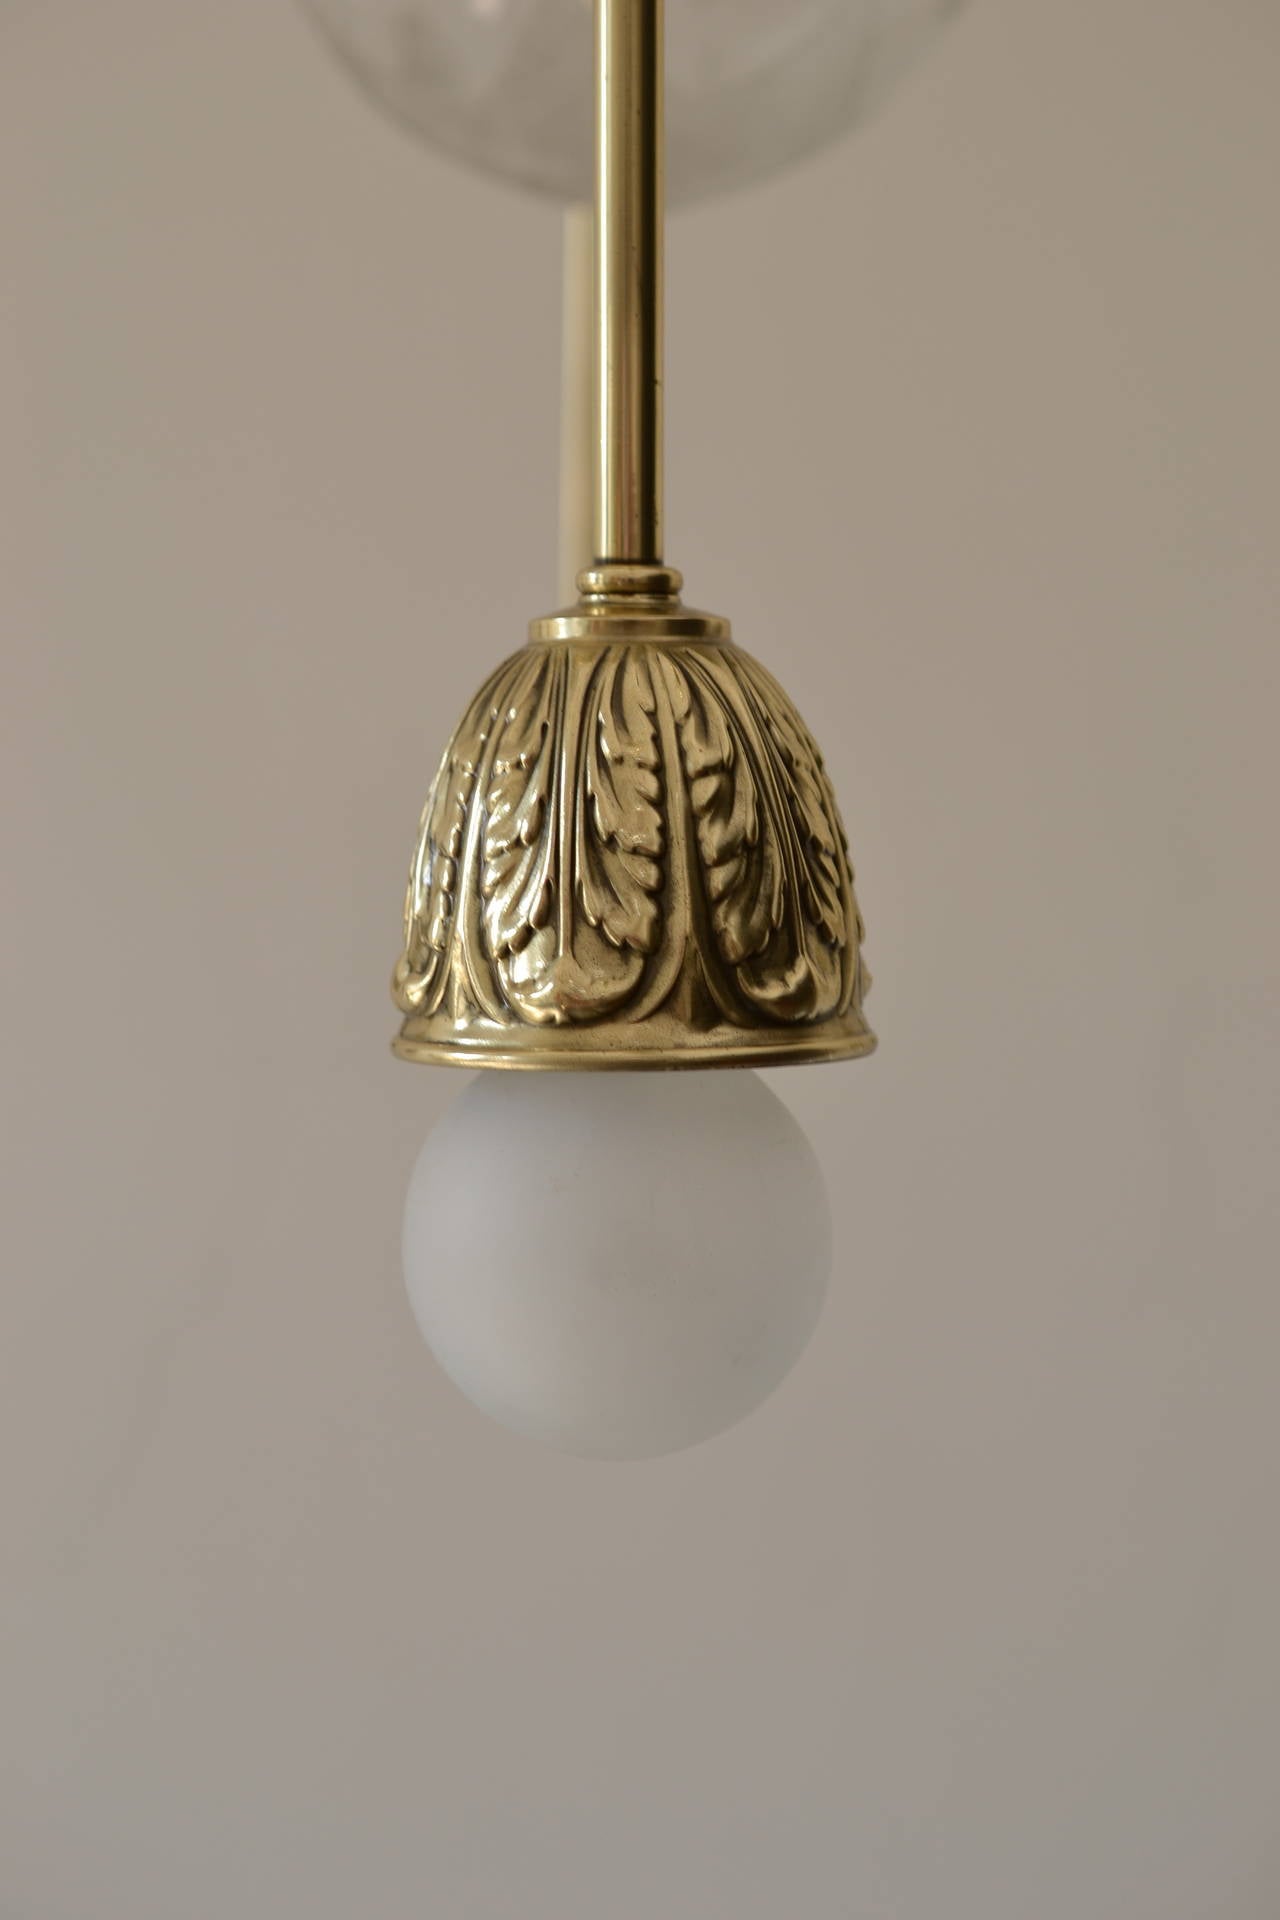 Historistic ceiling lamp with original glass
Polished and stove enamelled